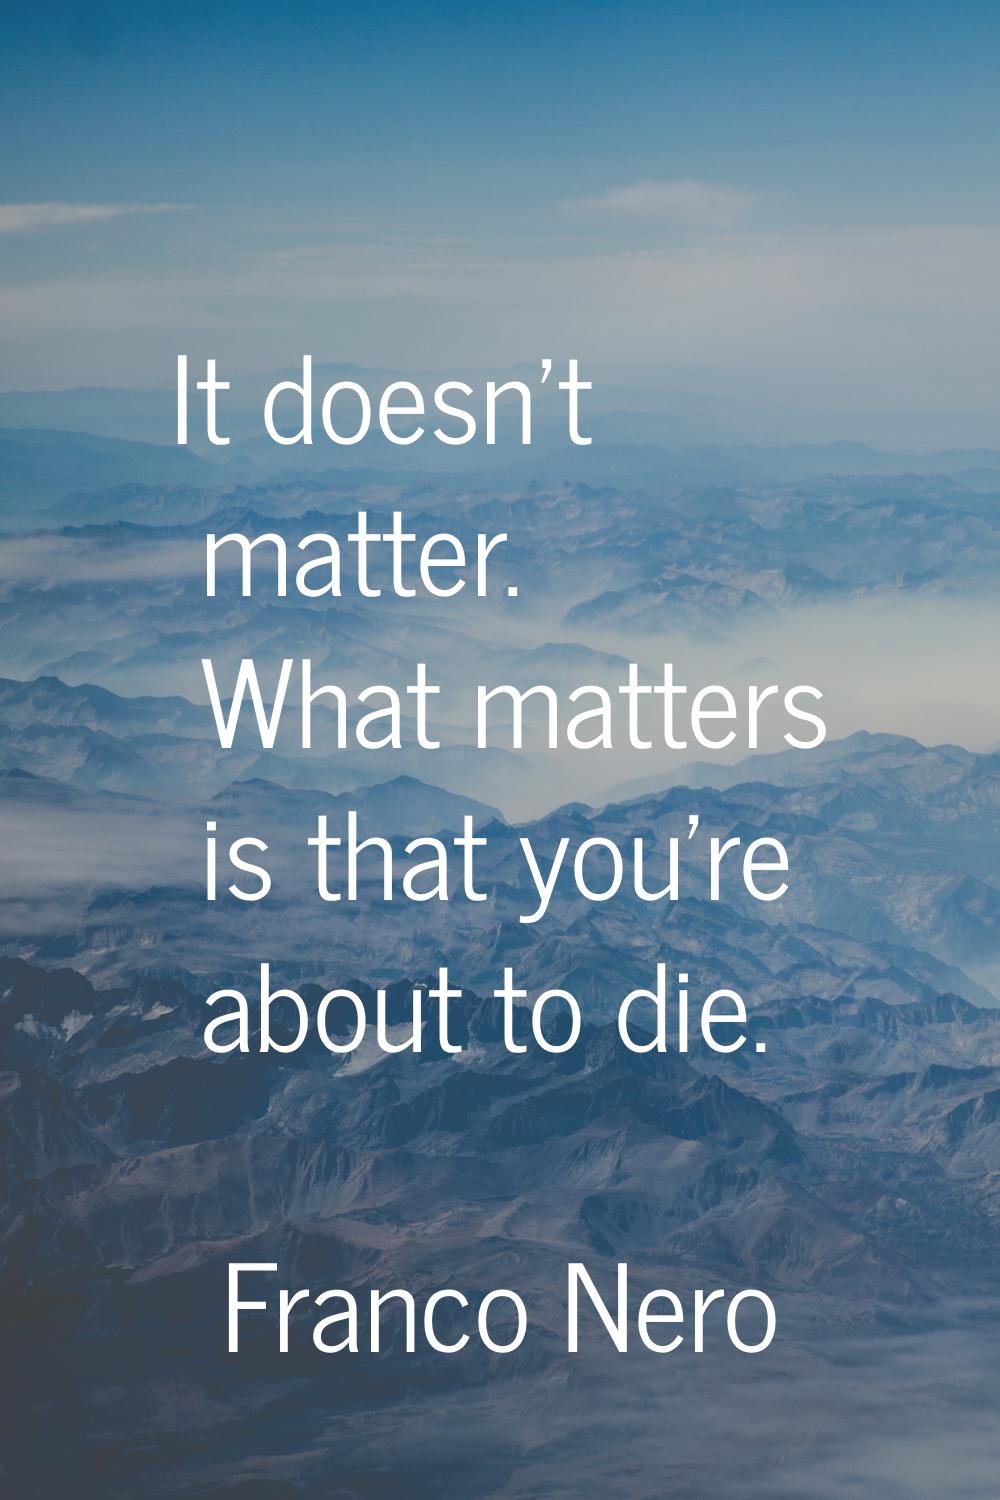 It doesn't matter. What matters is that you're about to die.